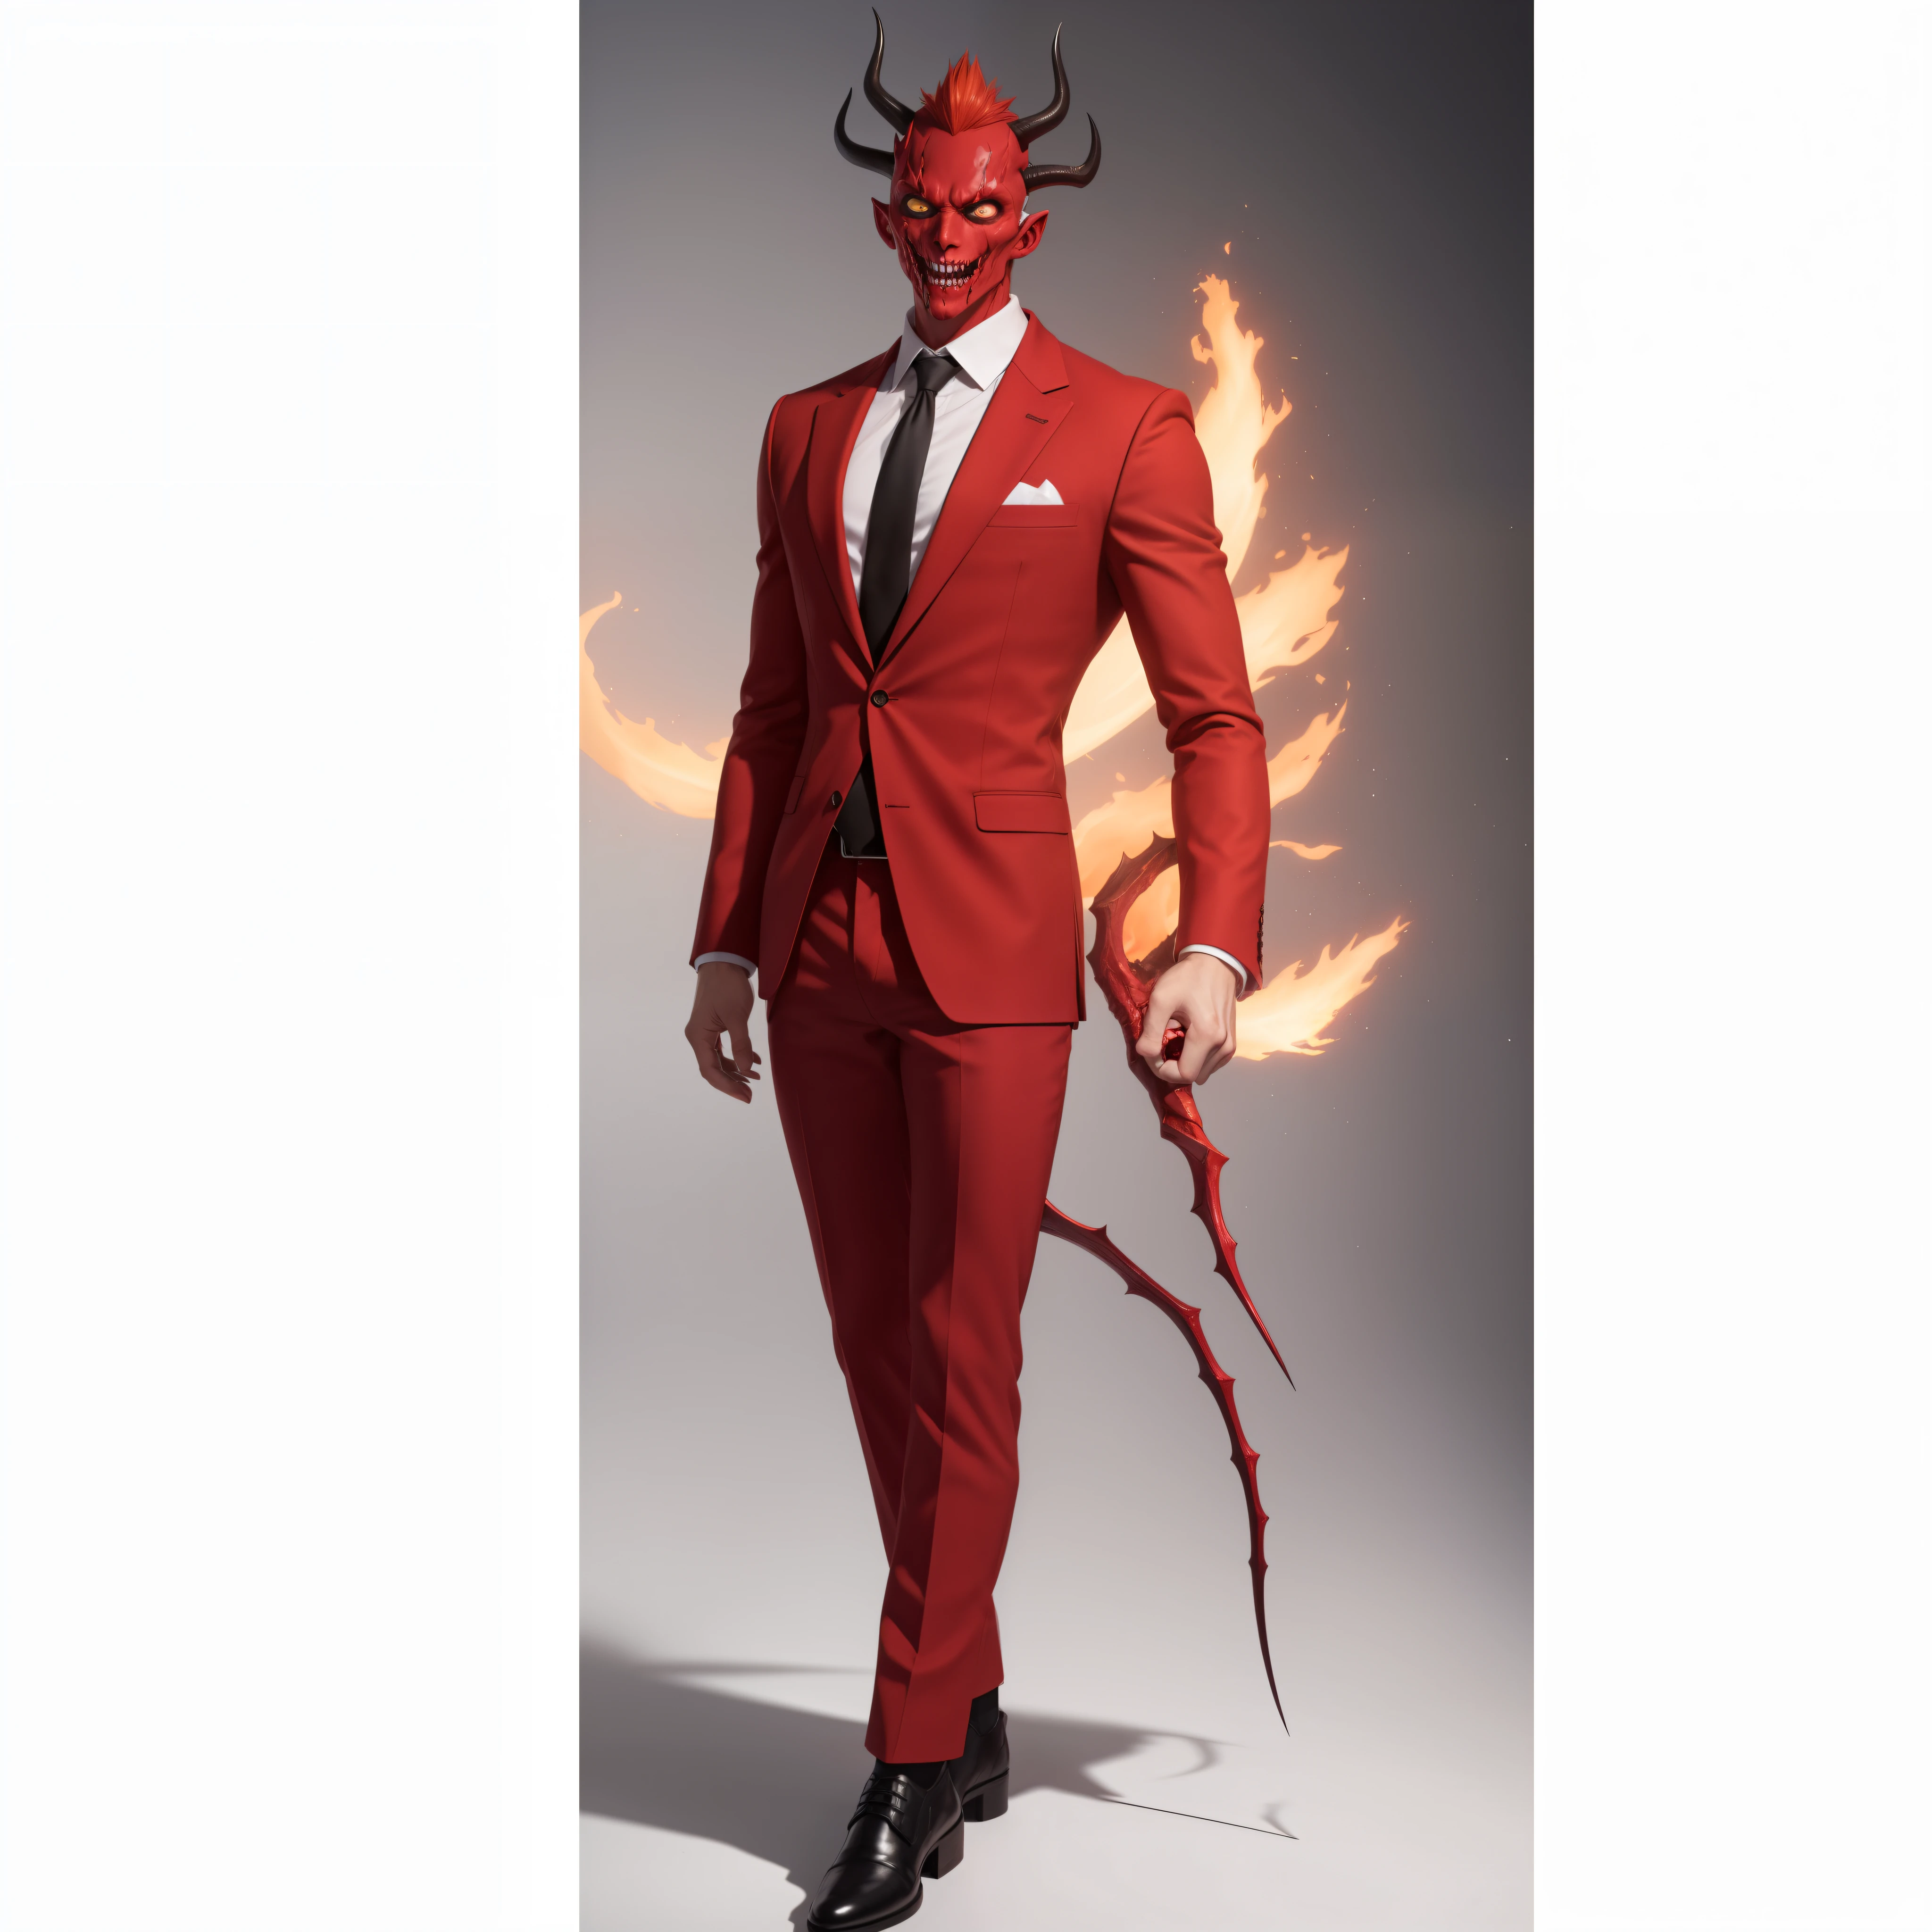 Masterpiece, best quality, T-pose, a 3D style, game character, holiday mischief, Ichigo Vasto Lorde from Bleach in Santa Business Suit: Visualize Vasto Lorde with fiery red skin reminiscent of Carnage, adorned in a Santa-color business suit. Picture him wearing sharp pointy horns pointing to the sky, and imagine the fiery glow around him. Capture the essence of a professional and devilish yet Slender Man plain face (normal lips:1.2).